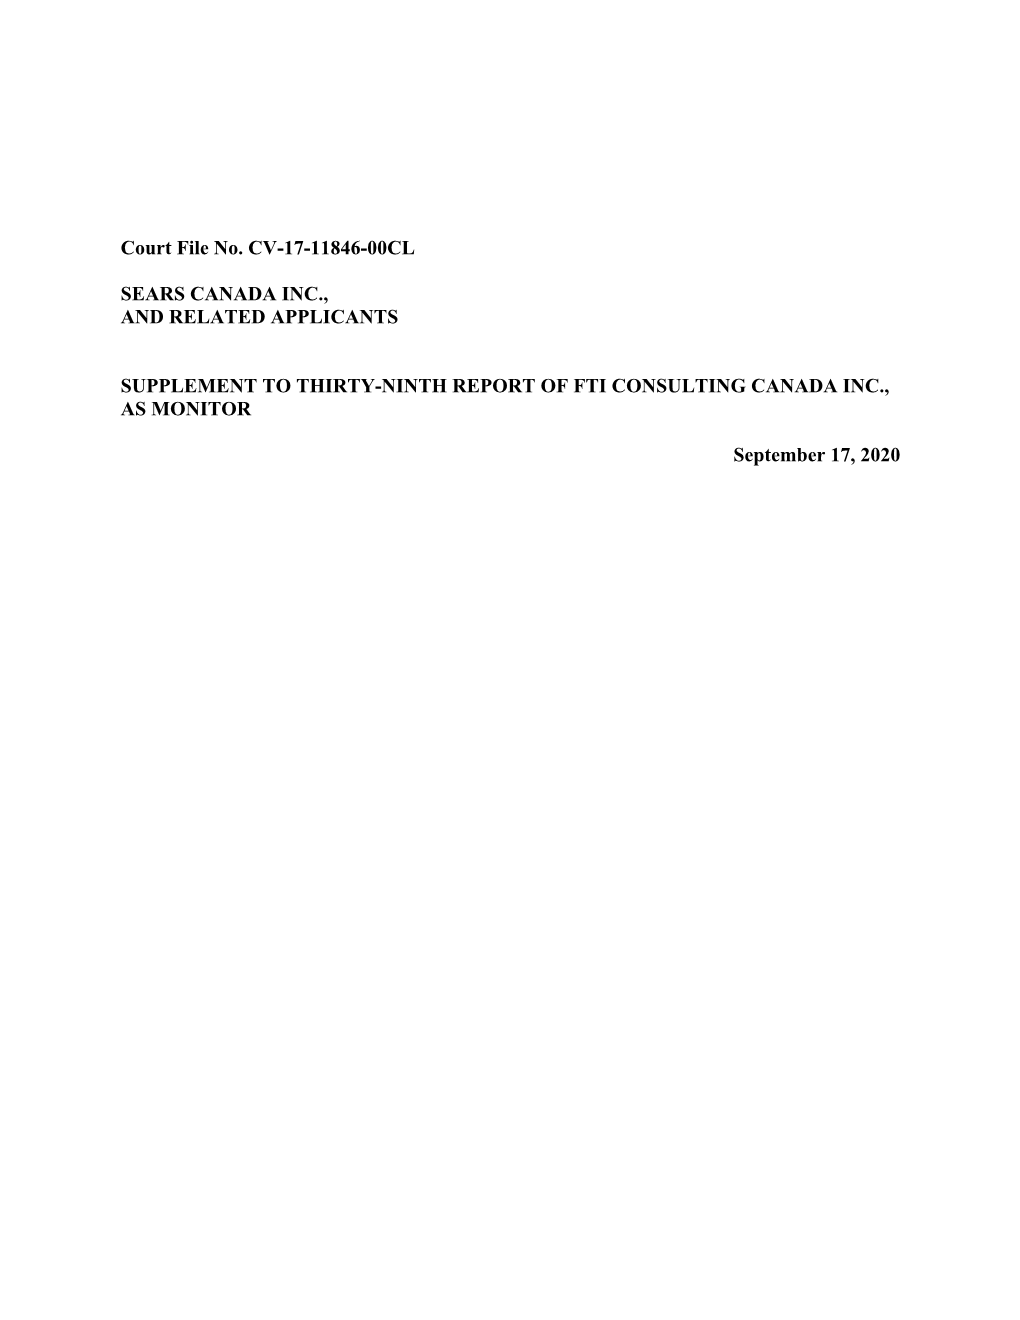 Court File No. CV-17-11846-00CL SEARS CANADA INC., AND